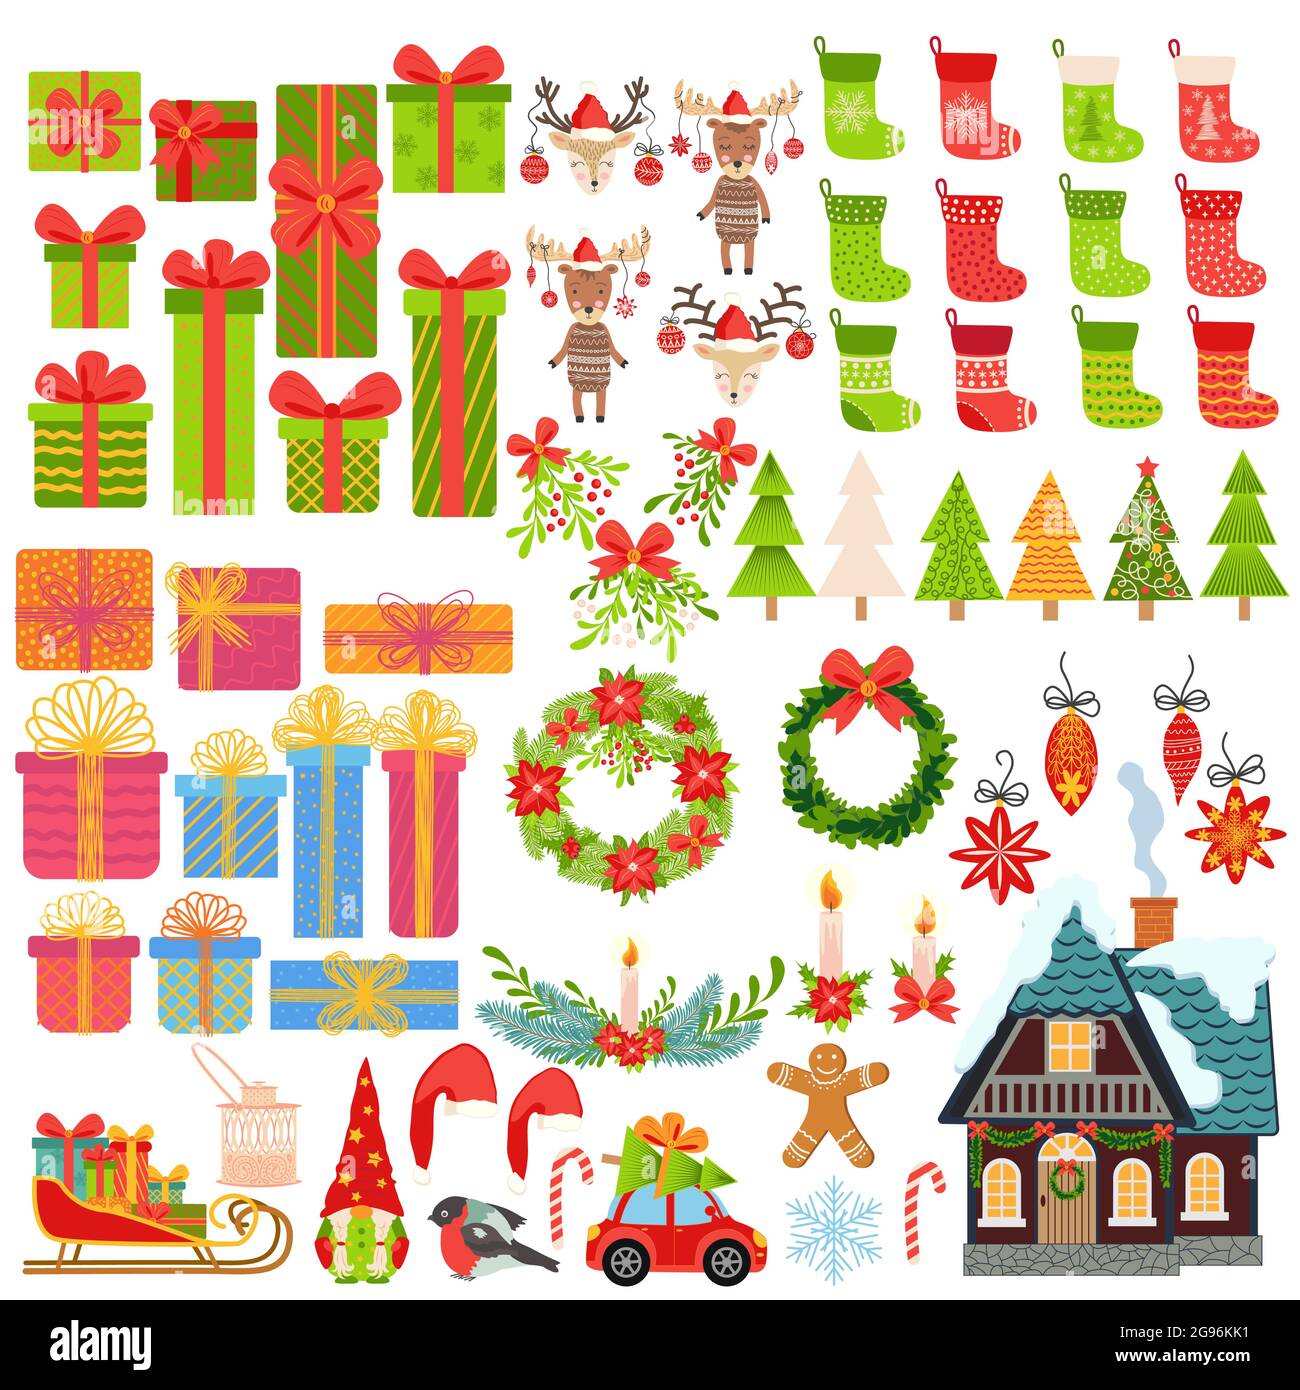 Big set of Christmas elements hand drawn. Gifts, stockings, Christmas trees, gnomes, candies, mistletoe, wreaths and other symbols of the New Year and Stock Vector